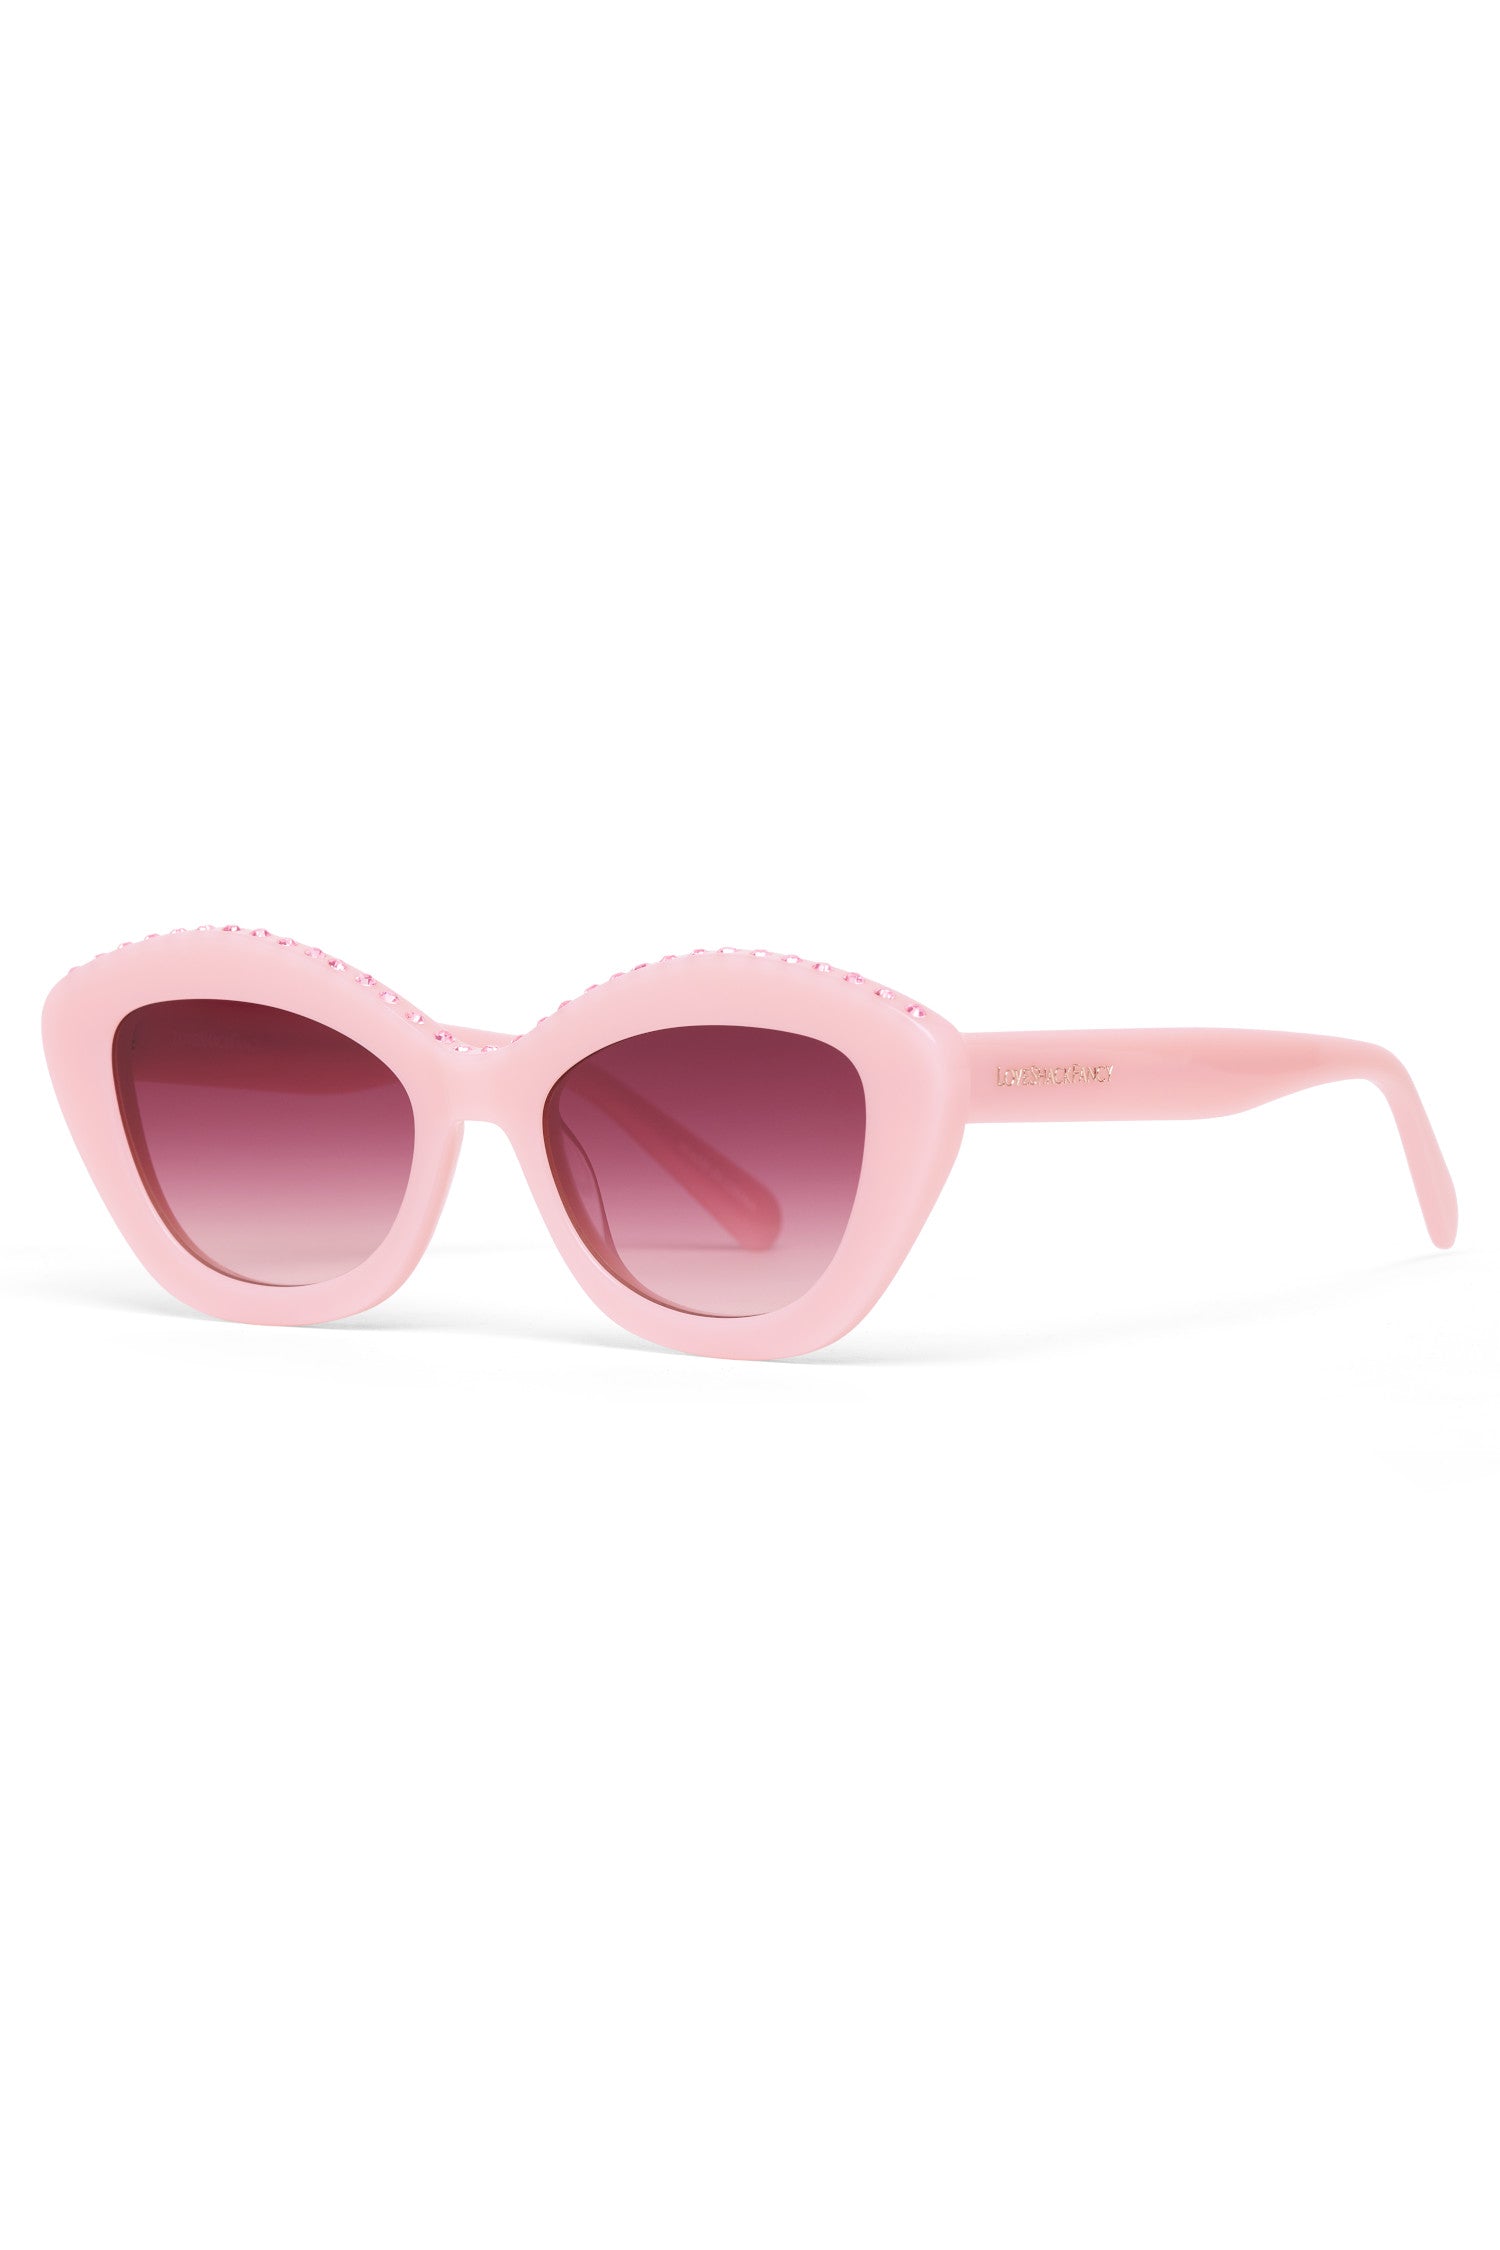 Pink Cat Eye Sunglasses with Rhinestones on top across bridge of nose and eyes.